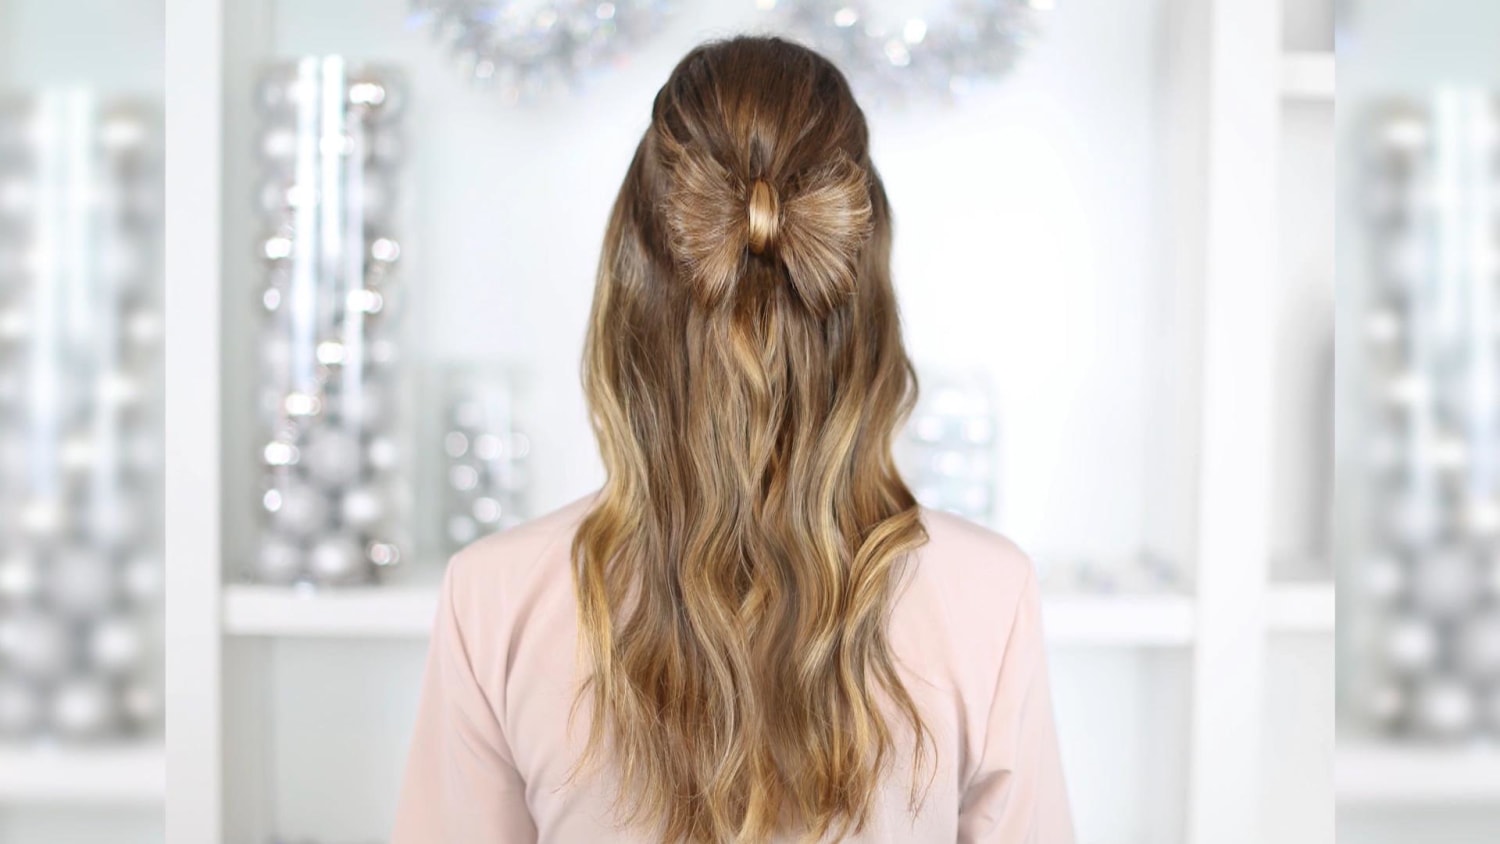 14 holiday hairstyles for Christmas or New Year's Eve